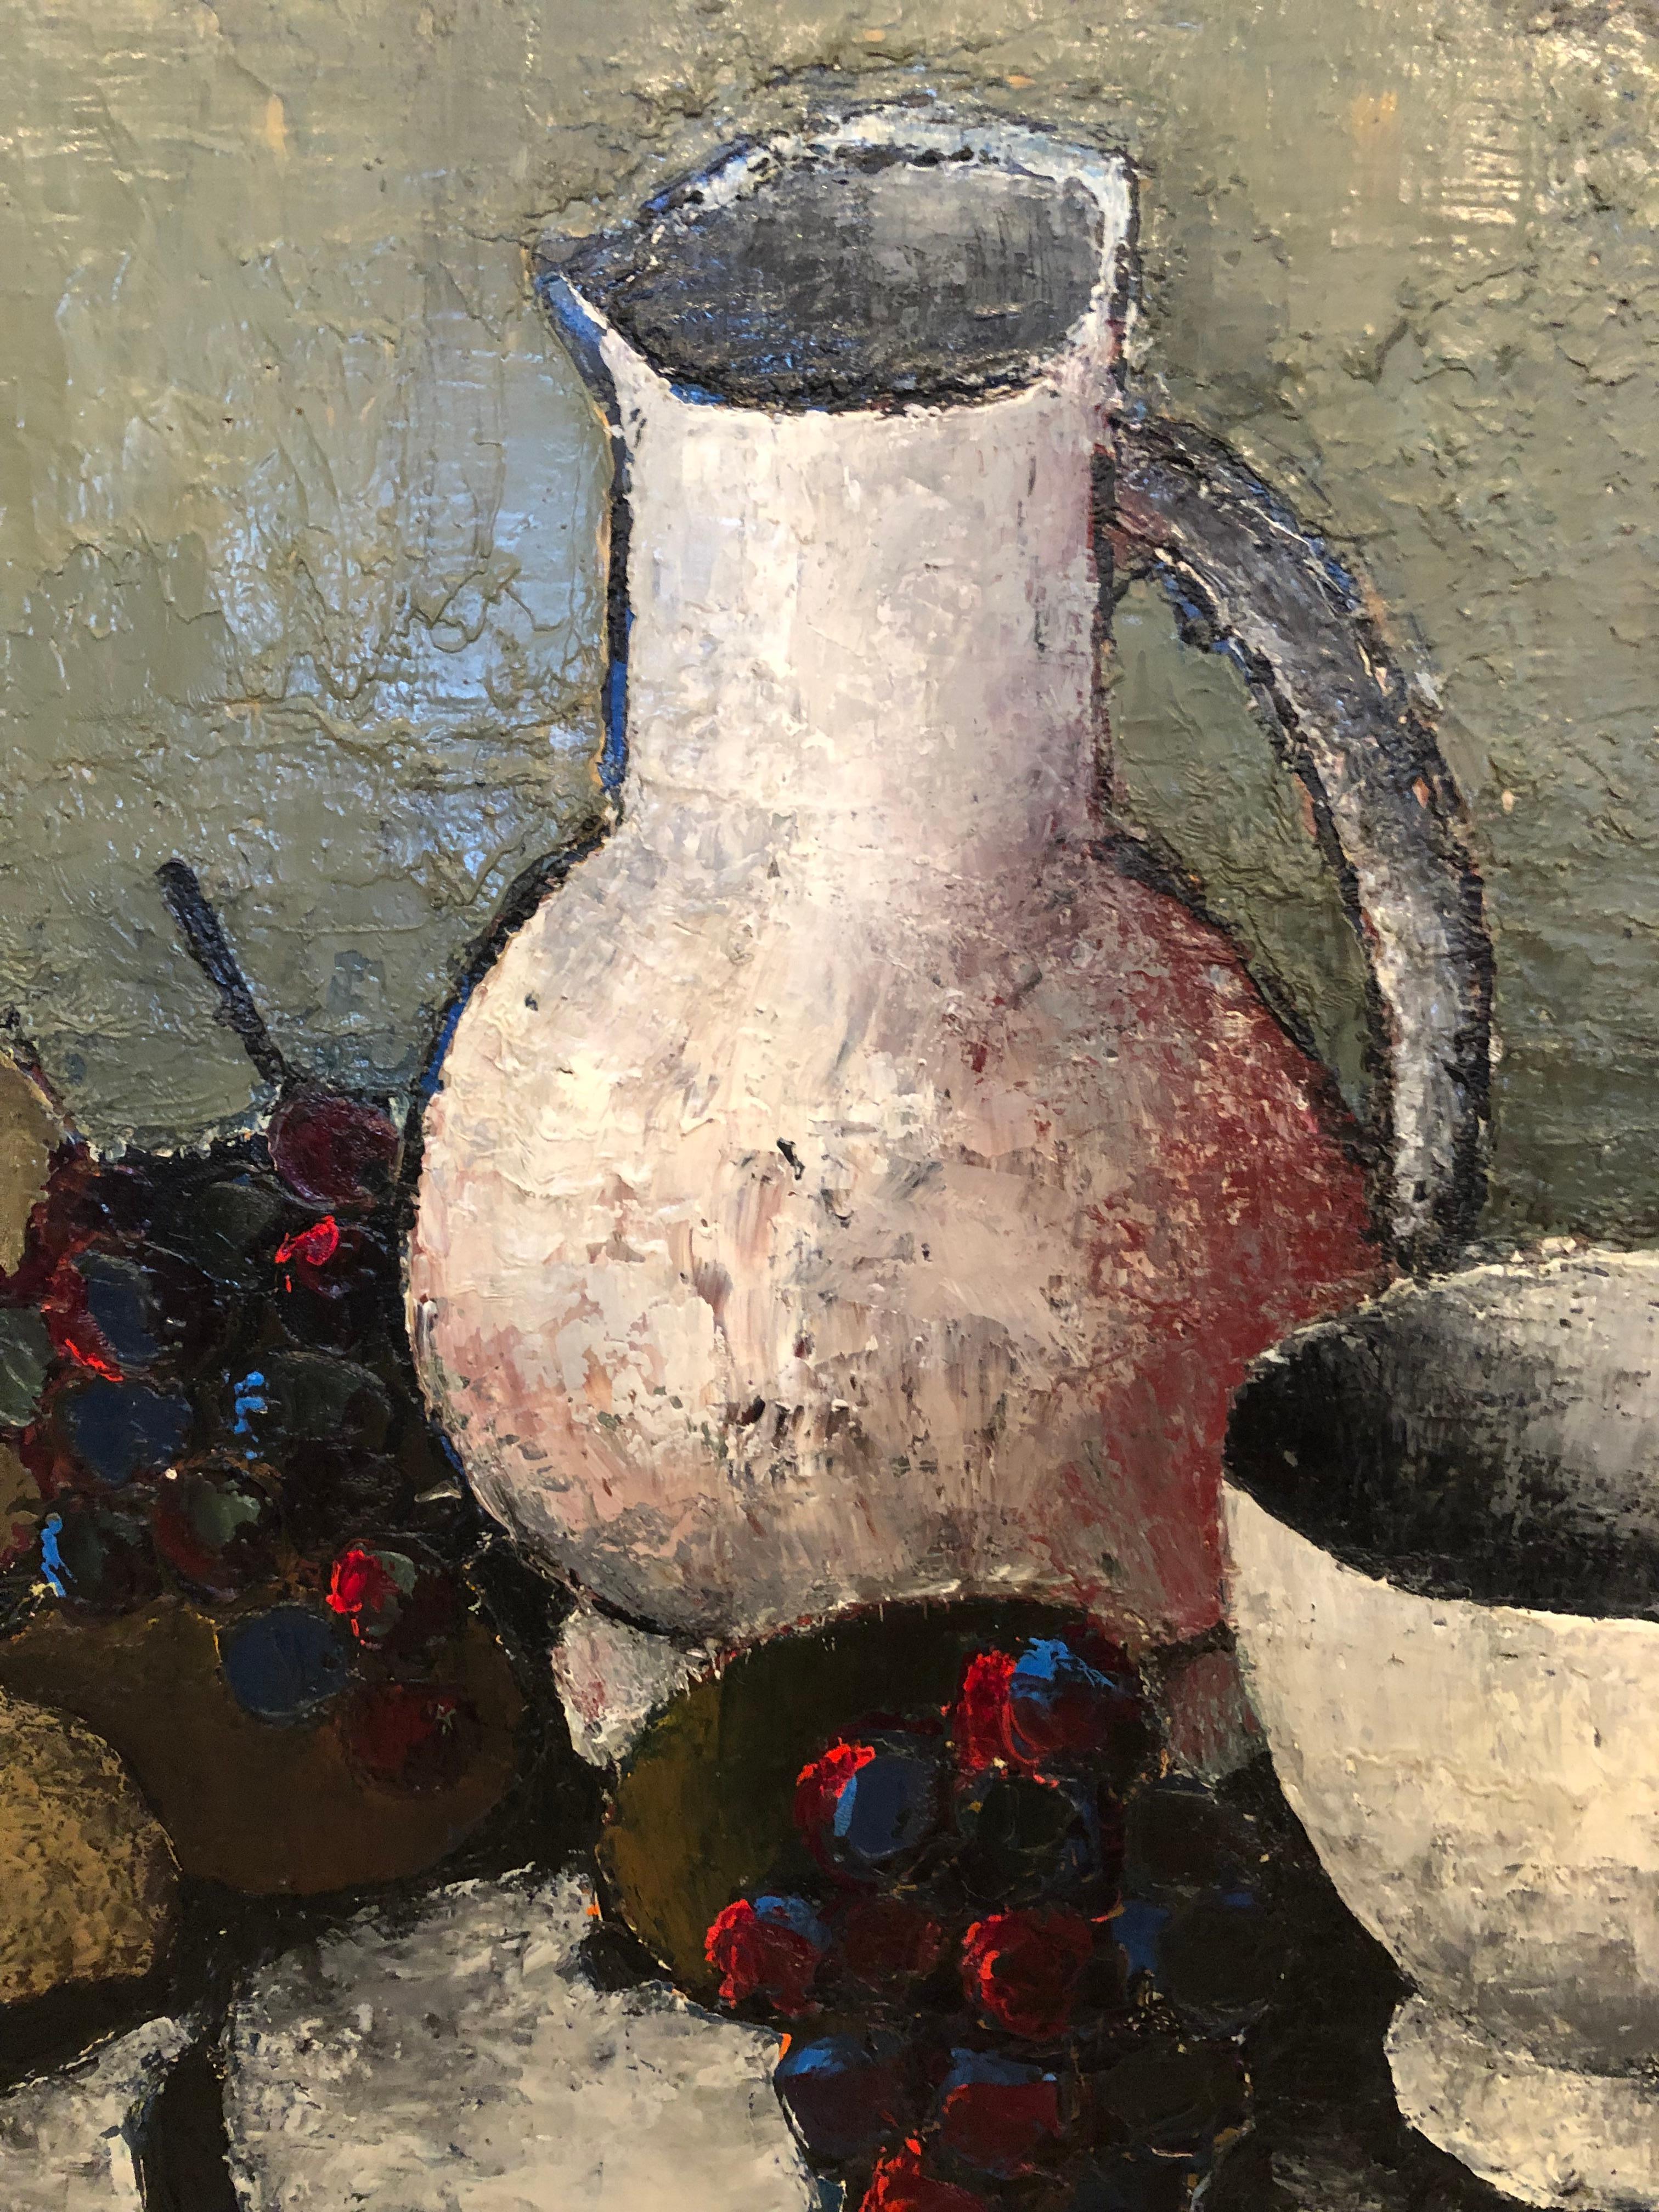 Beautifully rendered muted still life having a sophisticated modern style in tones of grey and white in the tablecloth and sculptural graphic pottery. The grapes have wonderful mix of red and blue, and the overall texture of application of paint is